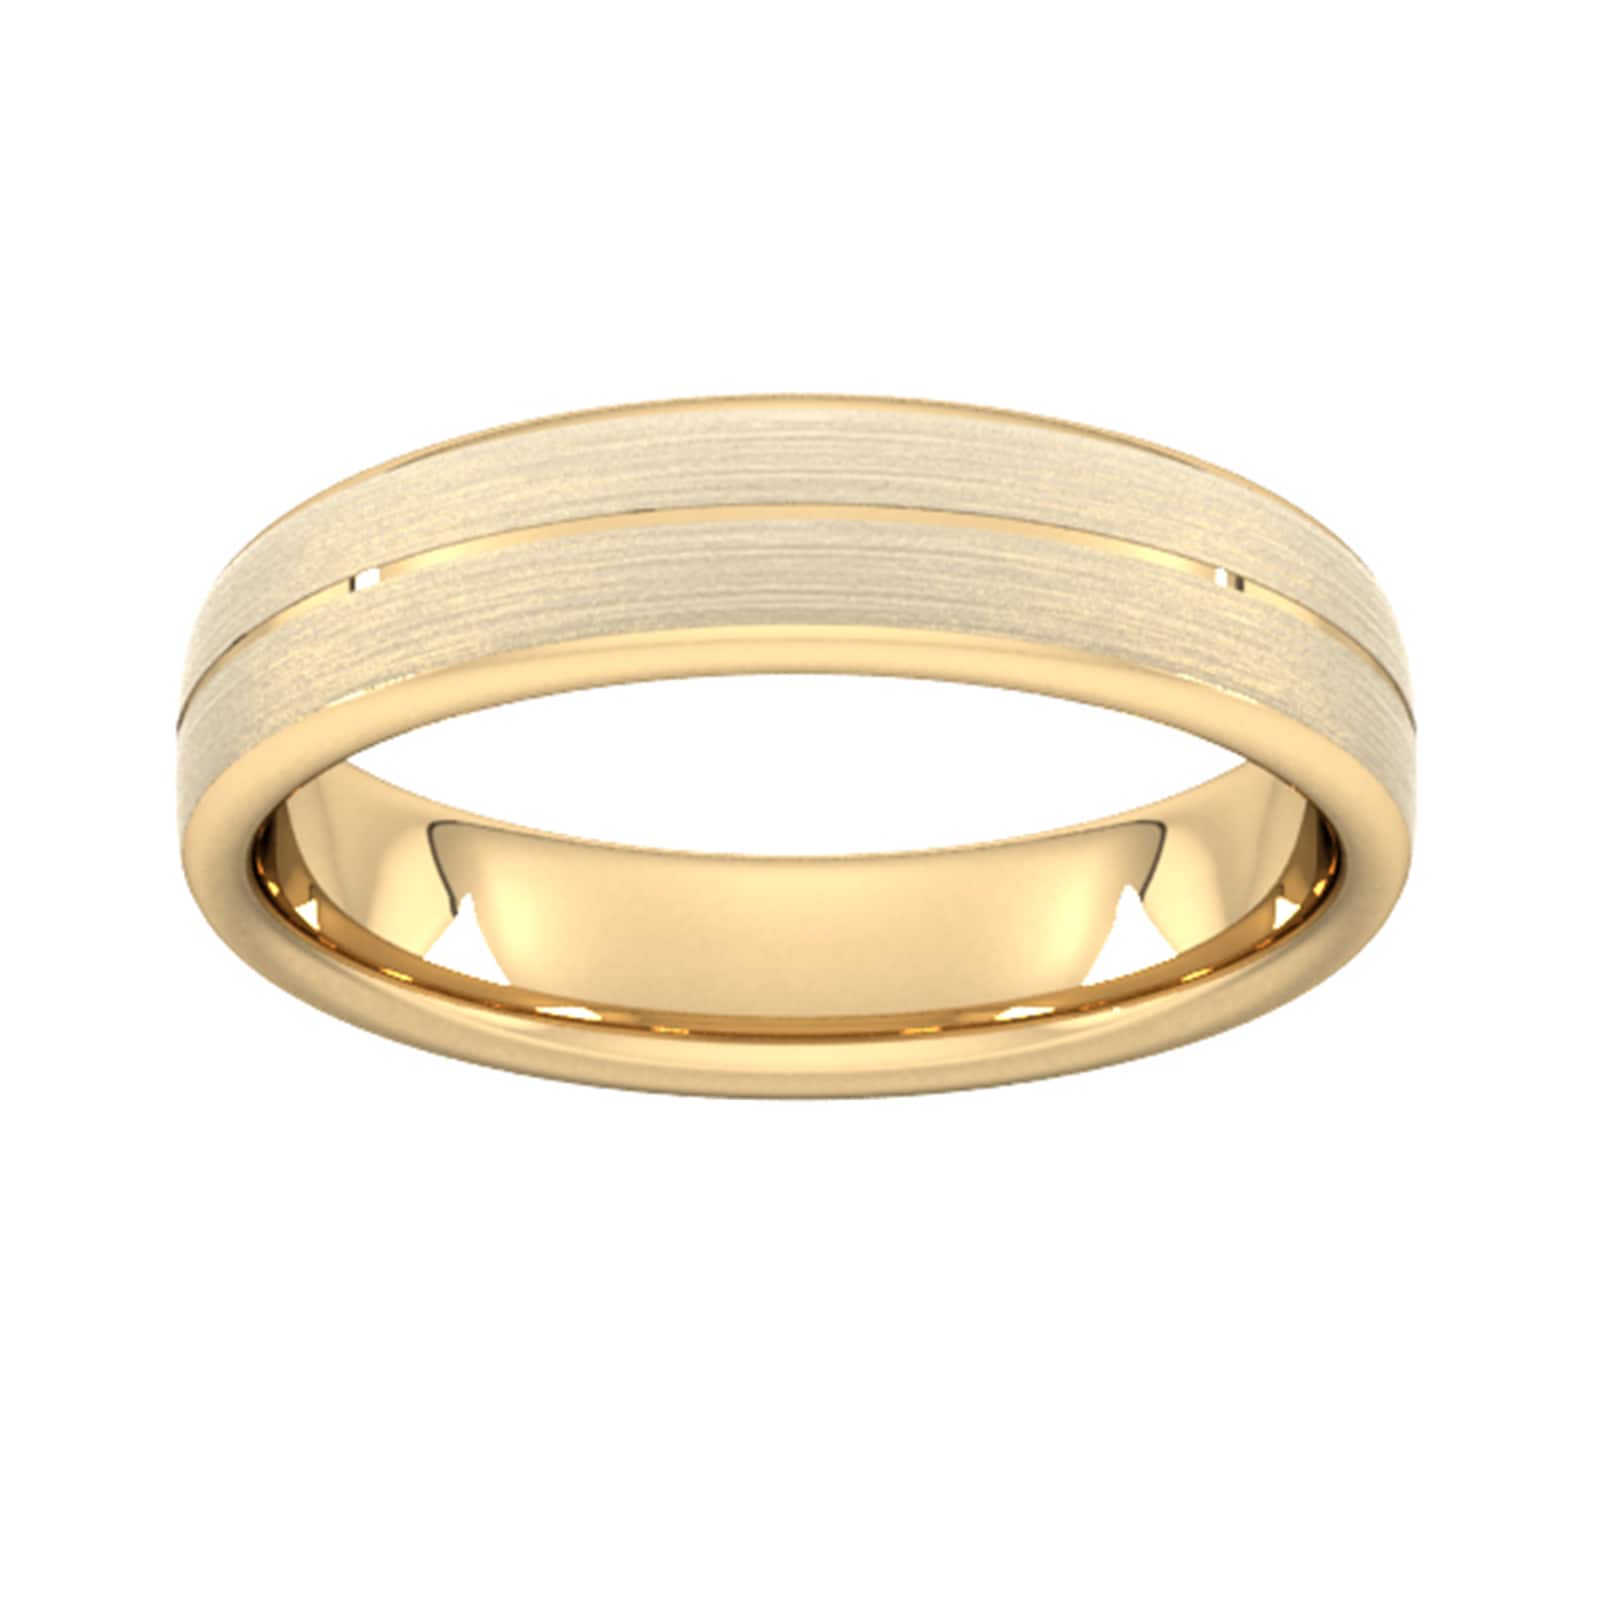 5mm D Shape Standard Centre Groove With Chamfered Edge Wedding Ring In 9 Carat Yellow Gold - Ring Size M